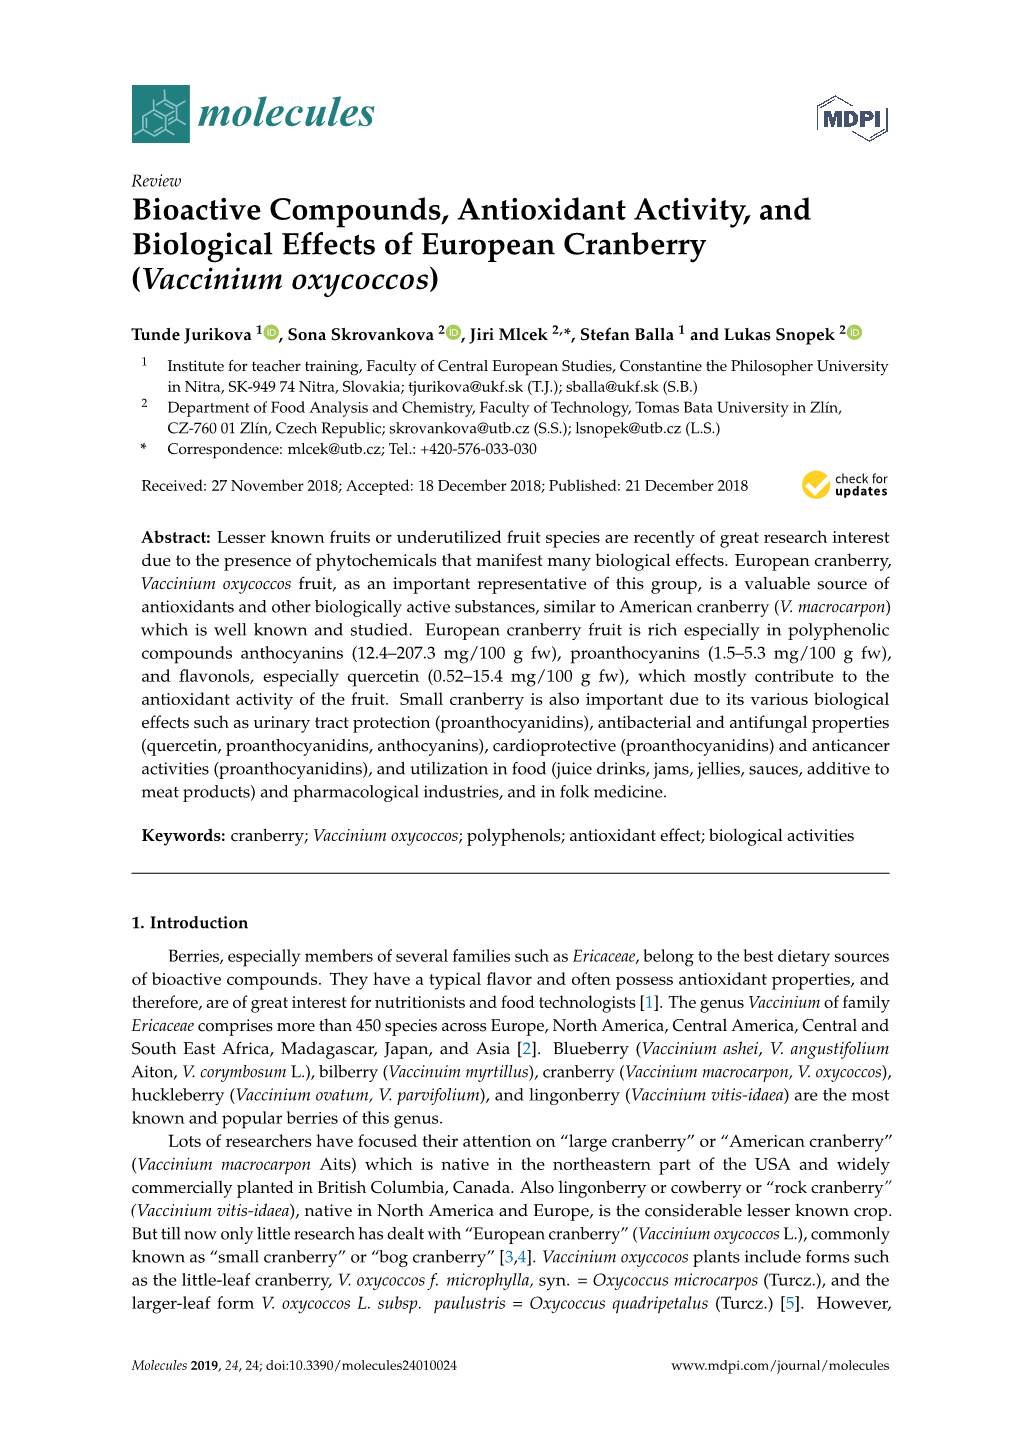 Bioactive Compounds, Antioxidant Activity, and Biological Effects of European Cranberry (Vaccinium Oxycoccos)